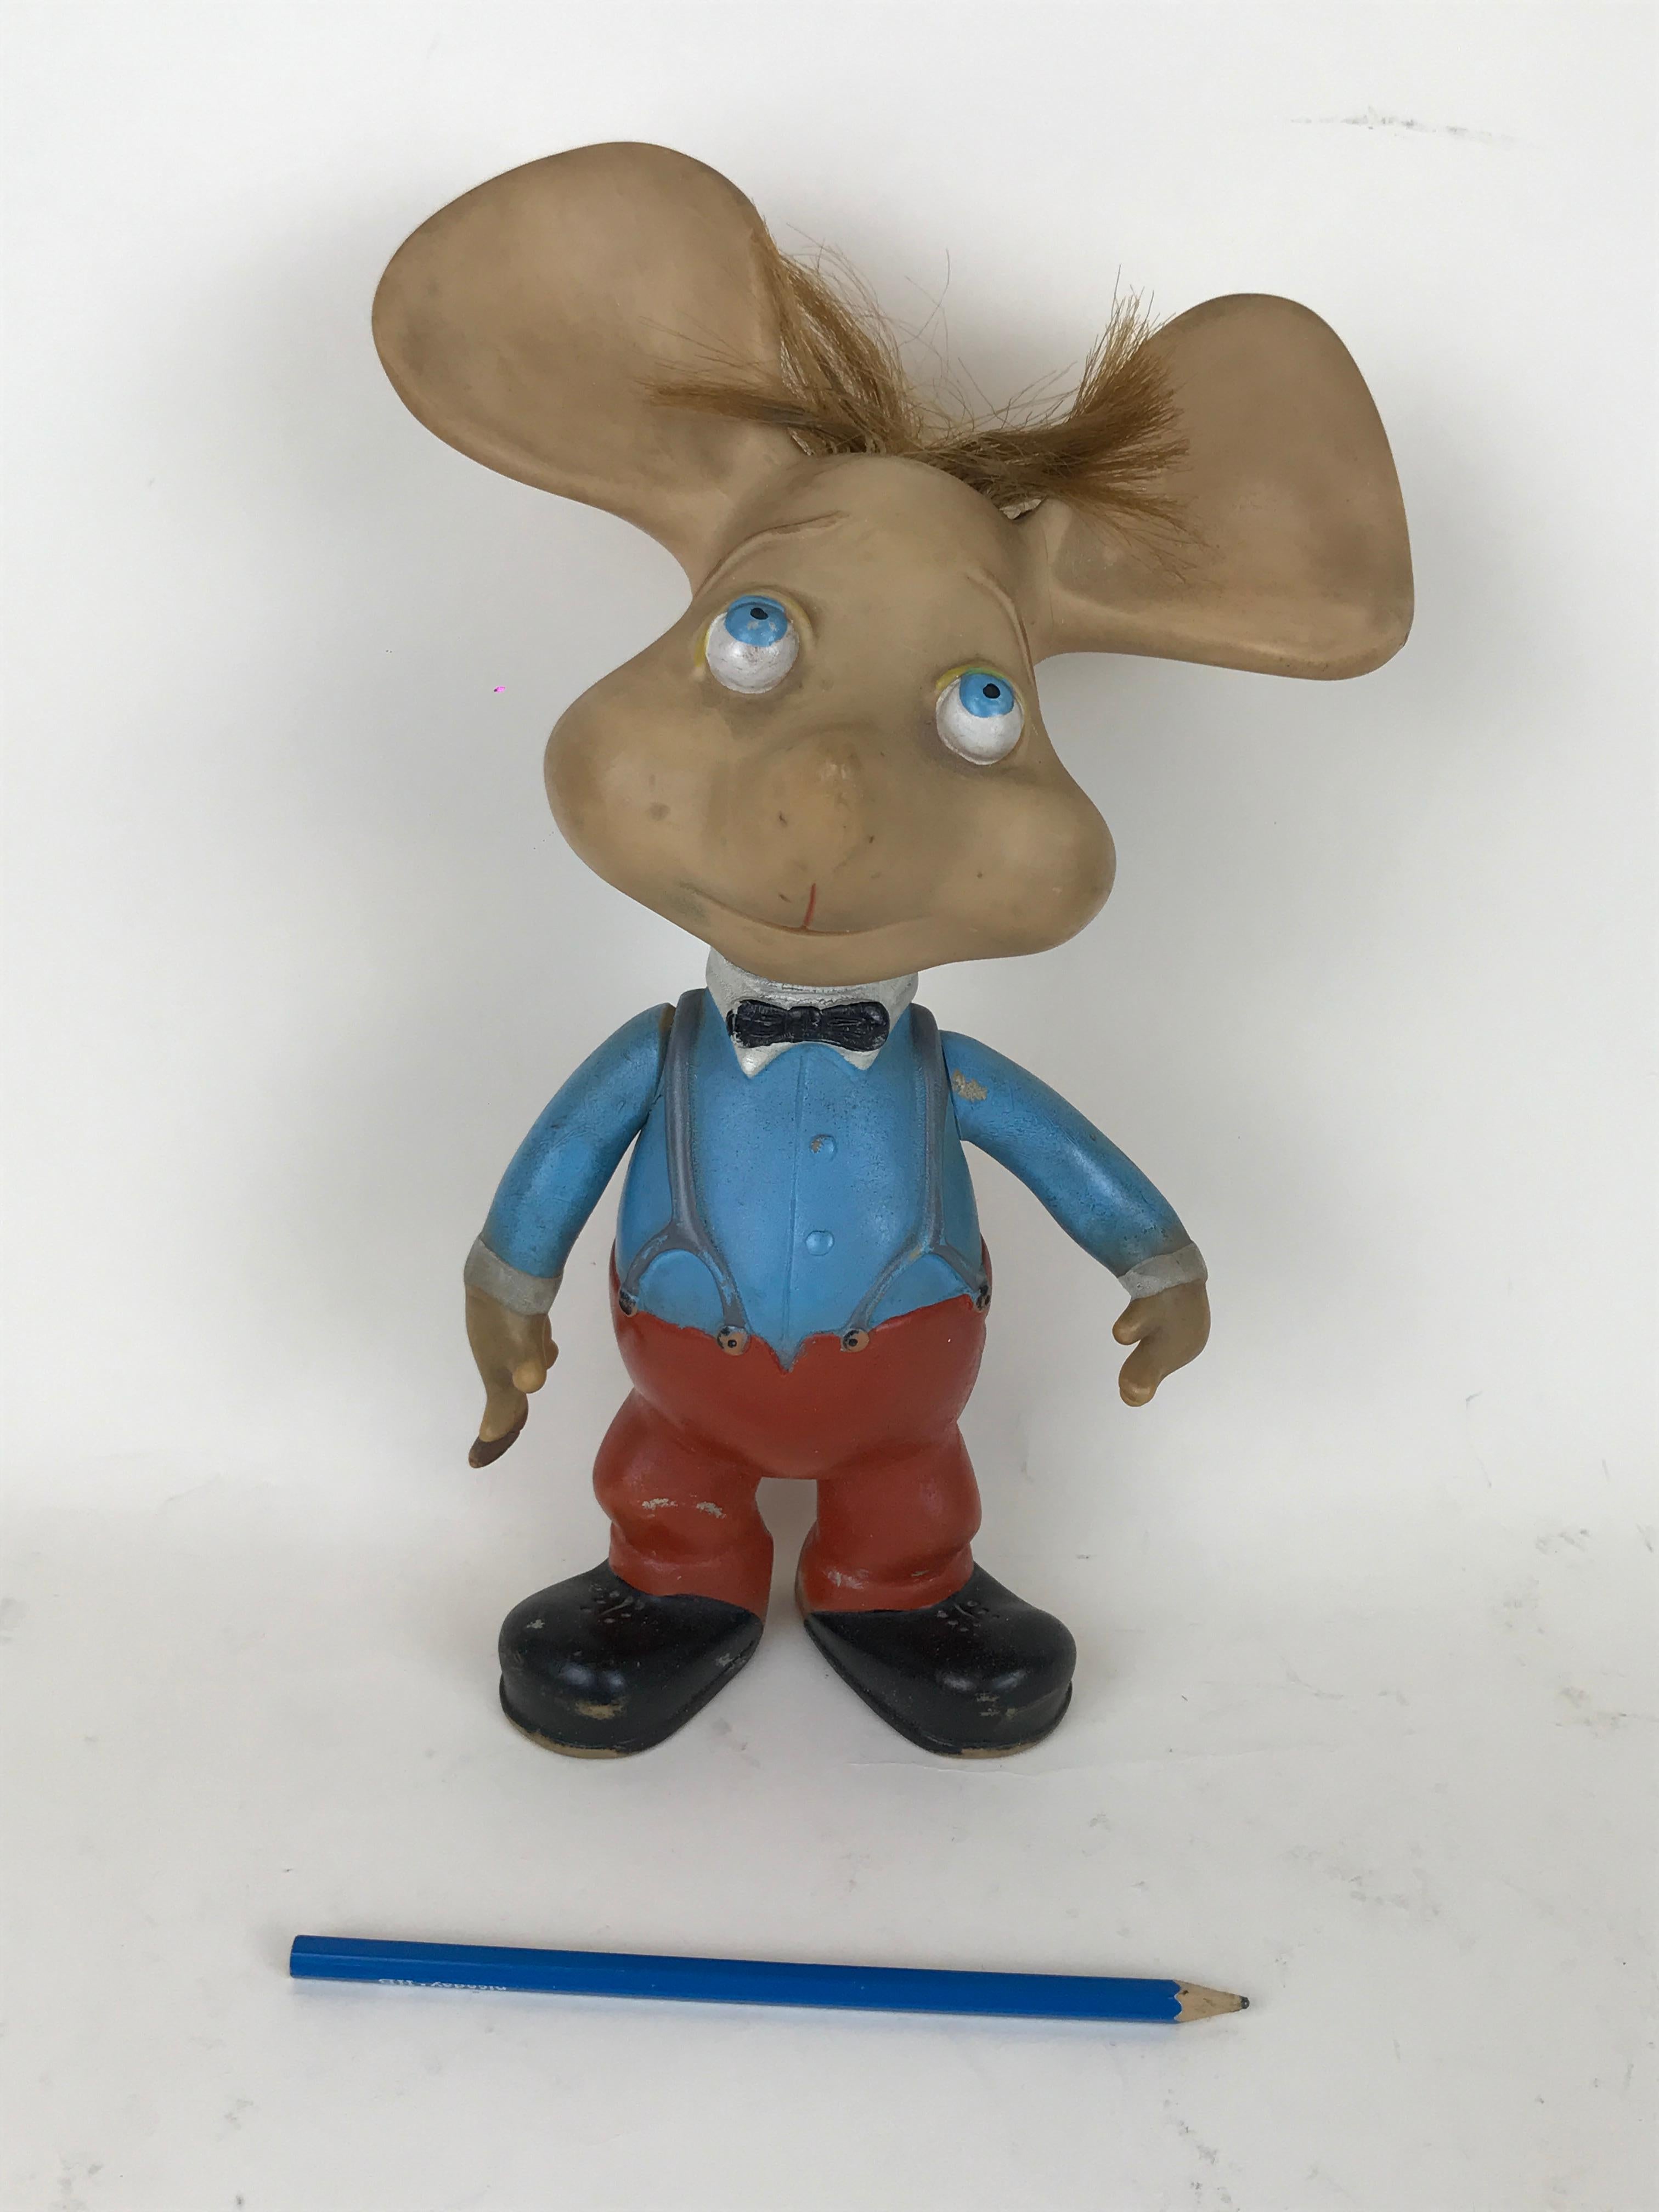 1960s iconic Topo Gigio mouse rubber squeak toy made in Italy, designed by Maria Perego in 1958.

The toy has movable arms and functioning whistle but doesn't have the original hat.

Collector's note:

Topo Gigio Mouse was the lead character